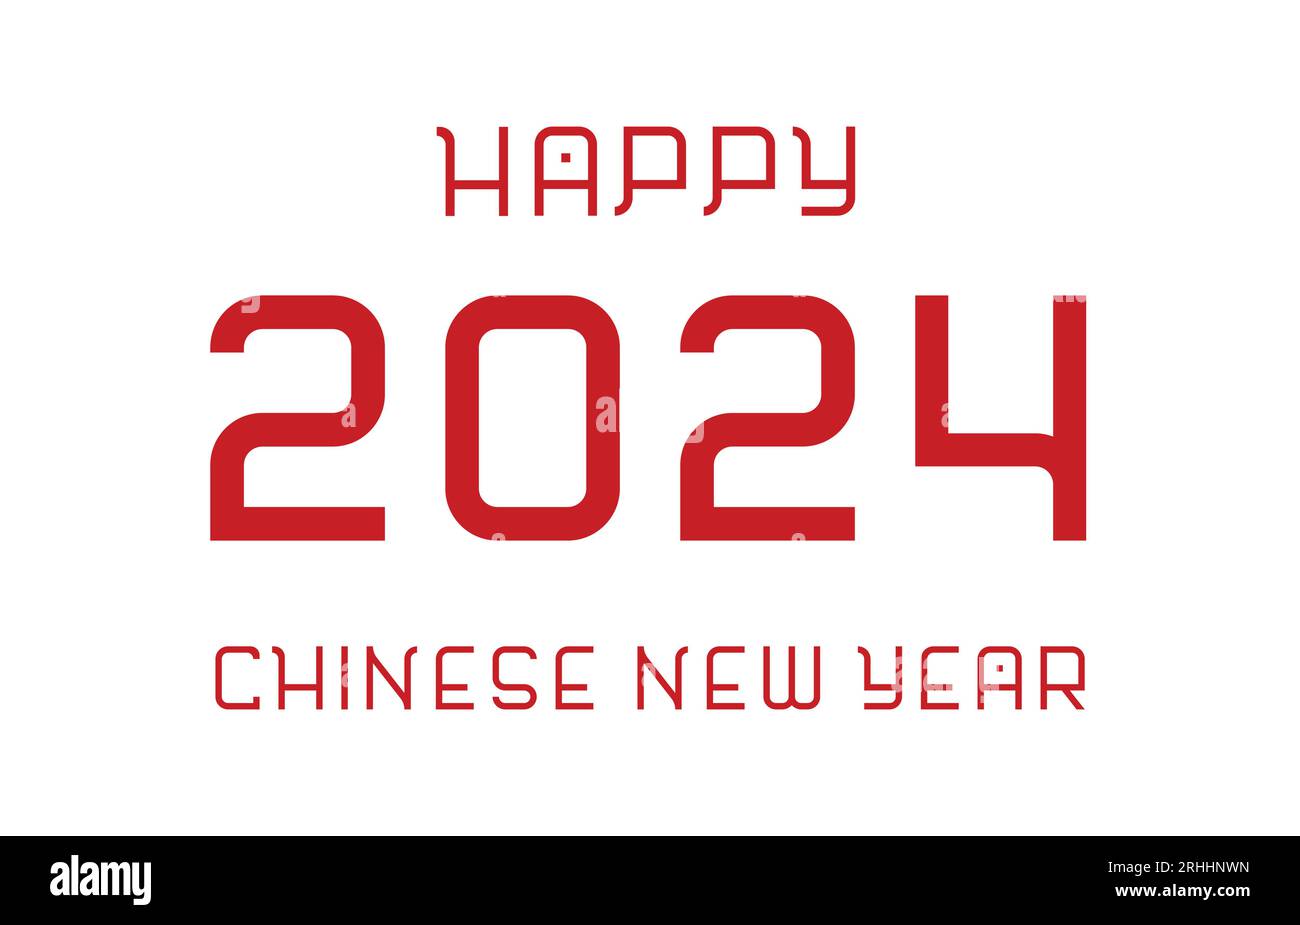 Vector isolated illustration with red text Happy Chinese New Year